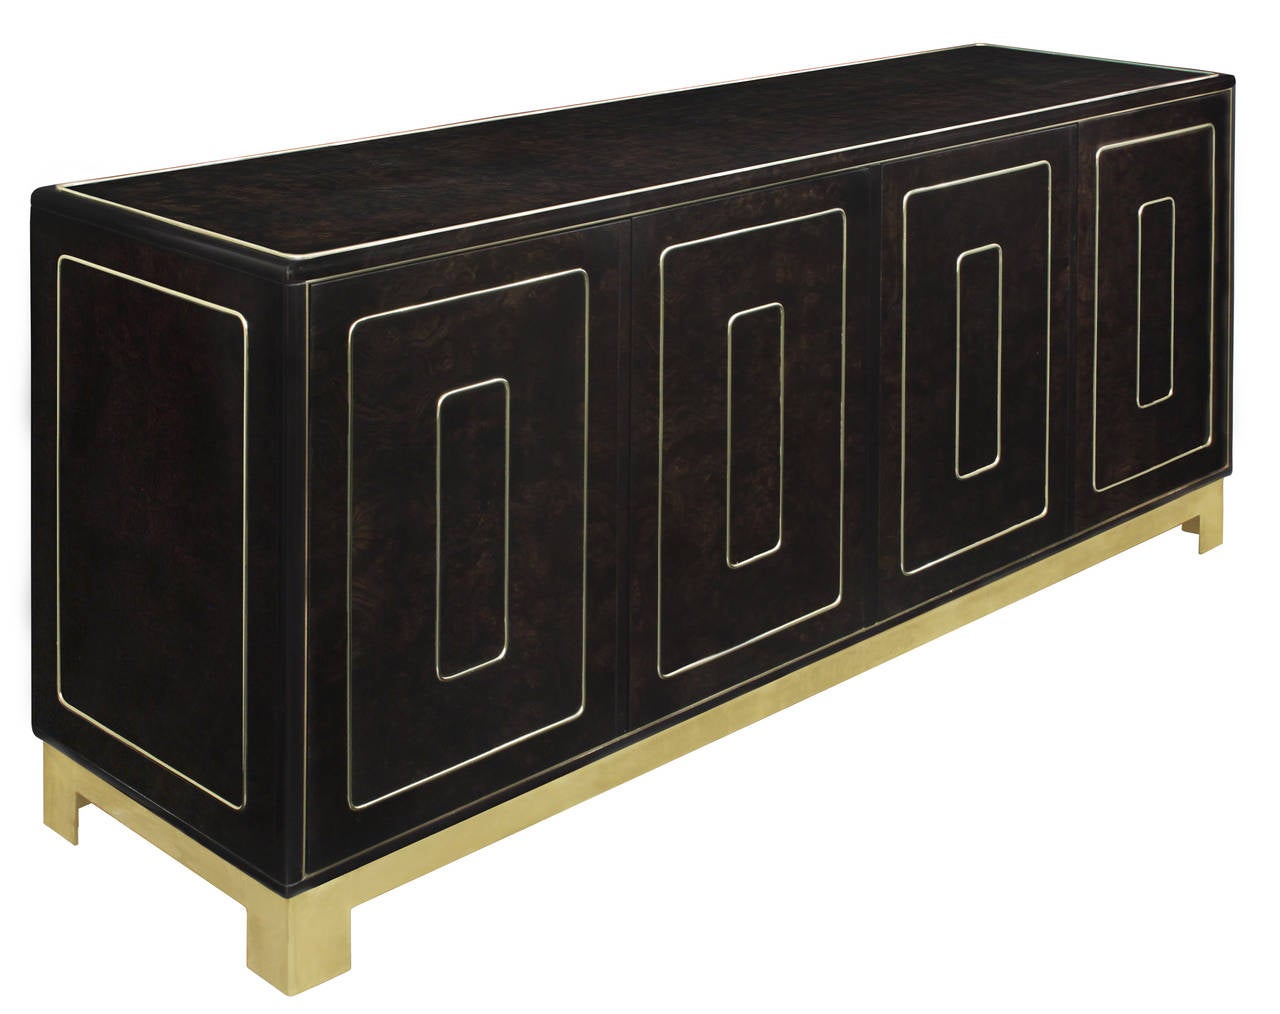 Chic four-door credenza in dark Circassian walnut with graphic brass inlays on doors and brass base by Romweber, American, 1970s (signed “Romweber Furniture” on inside drawer).
This credenza is beautifully made.